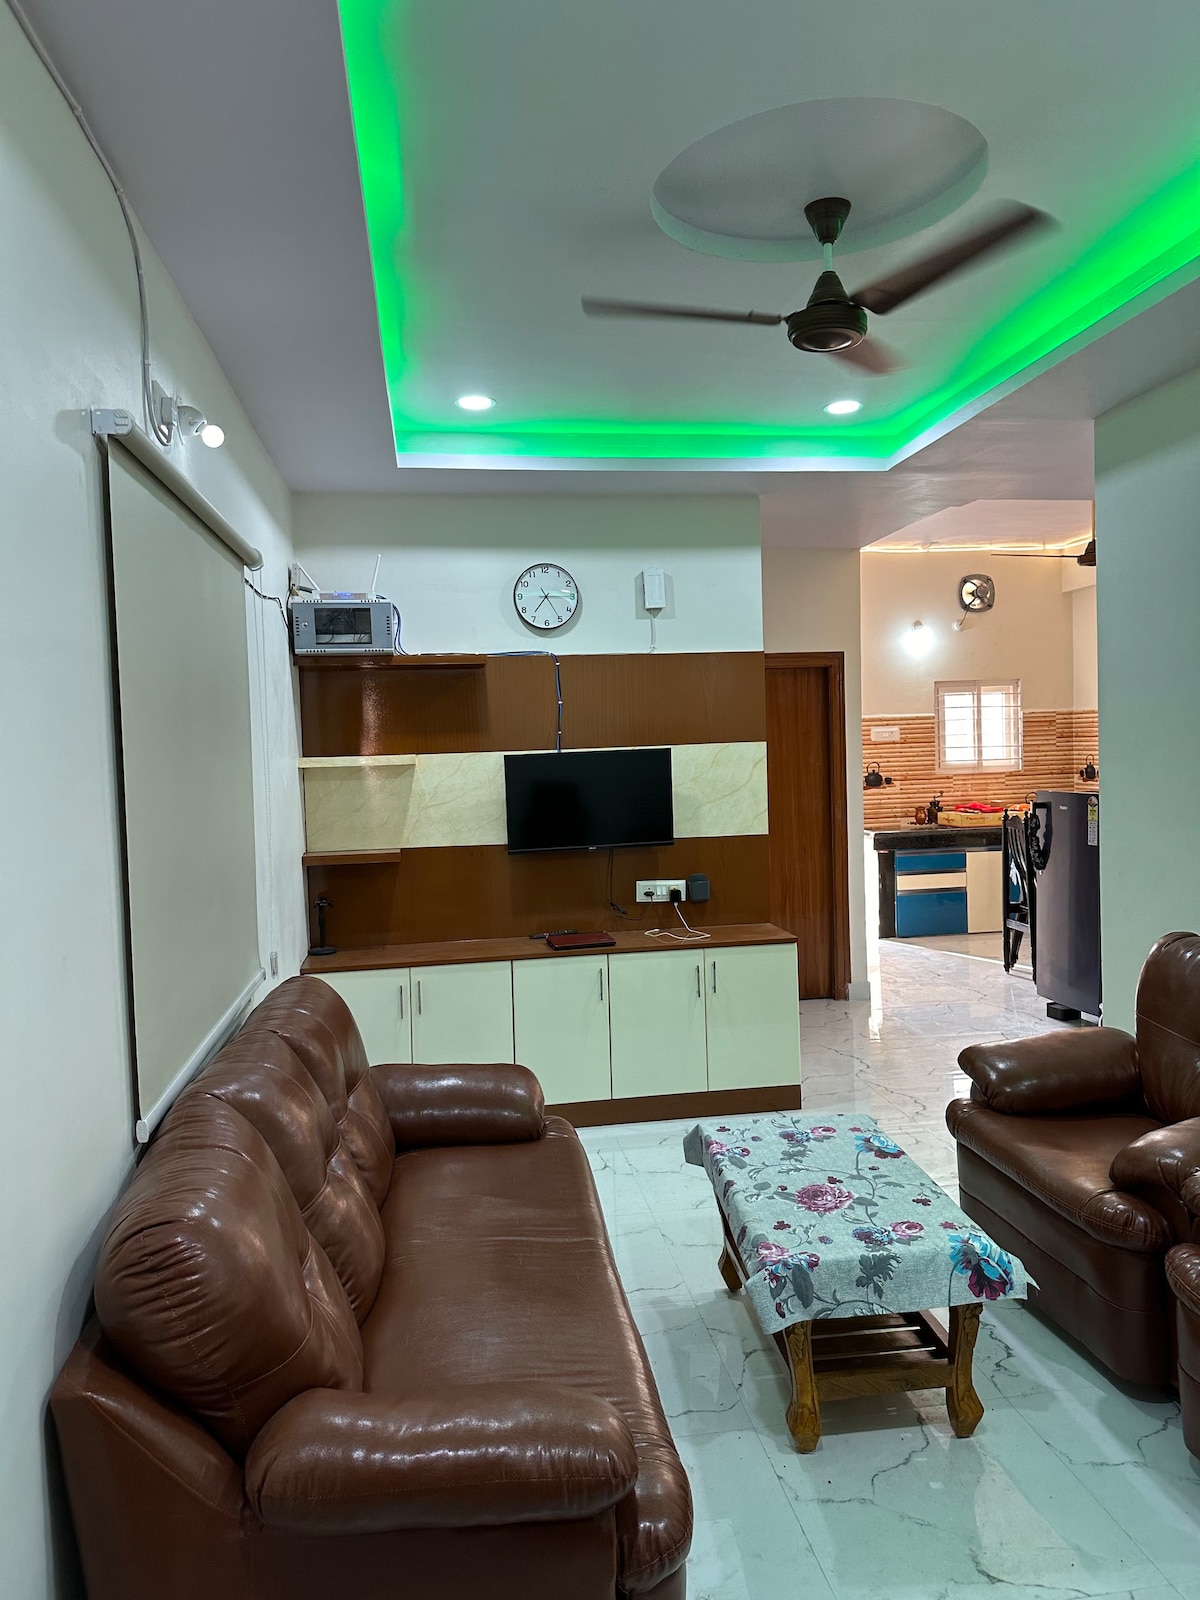 Welcome to our cozy flat
its a 2bhk each of 2flats